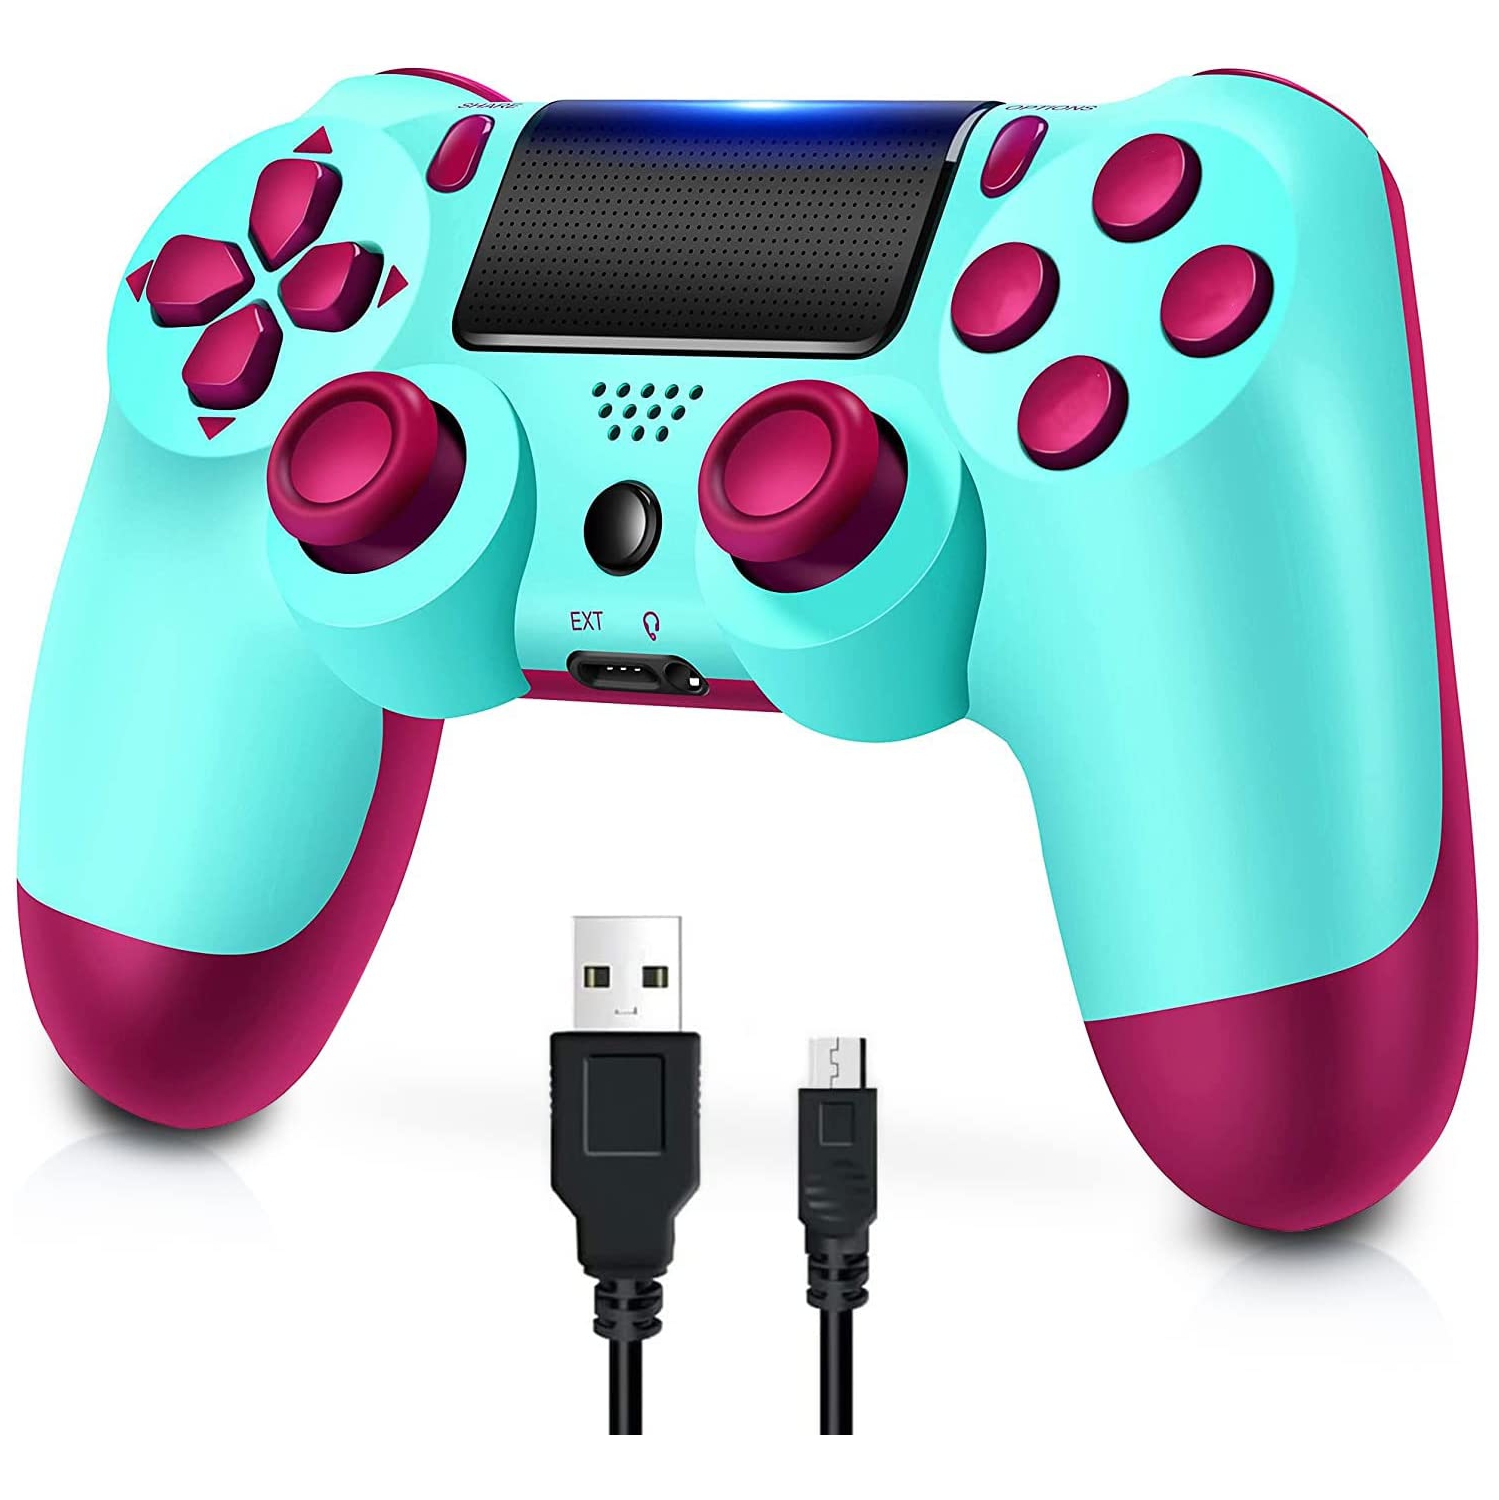 [2022 Upgraded Joystick] Wireless Controller for PS4 Playstation 4/PS4 Pro/Slim Console with Touch Panel and Double Shock (Berry Blue)